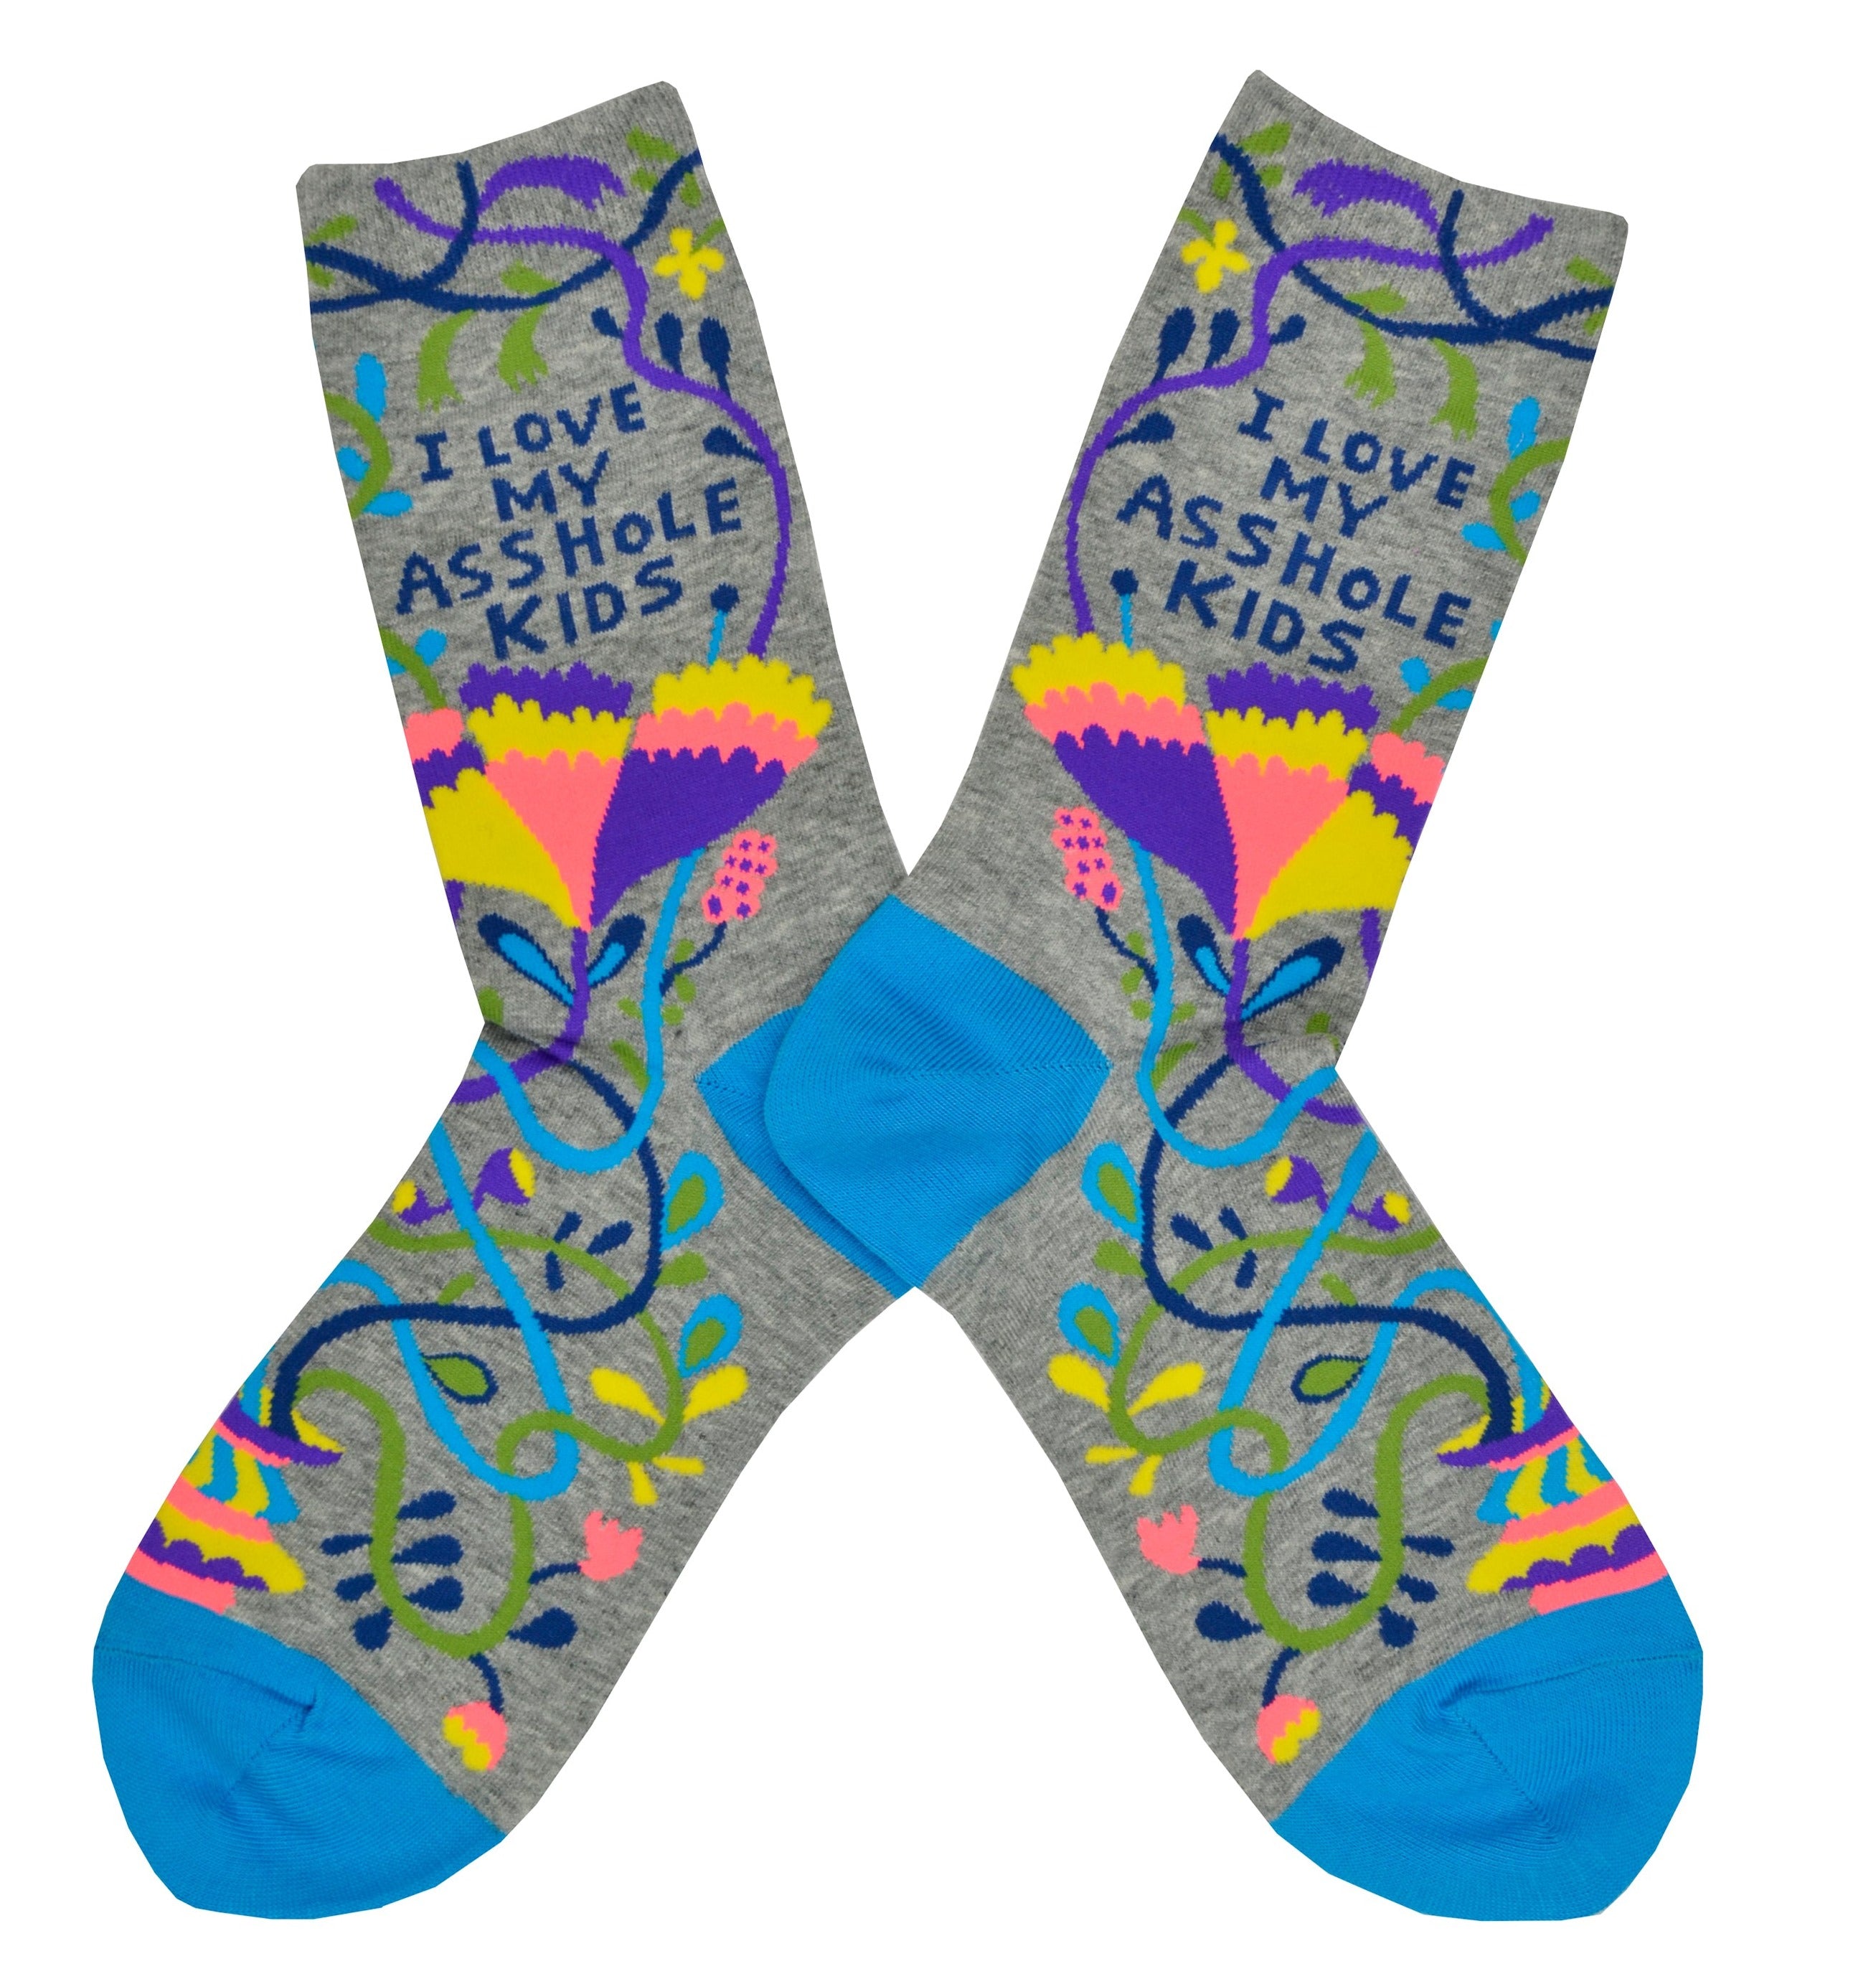 Shown in a flatlay, a pair of women's Blue Q brand combed cotton crew sock in grey with a teal heel and toe. The socks feature an abstract floral design in yellow, purple, orange, and teal with the words, 